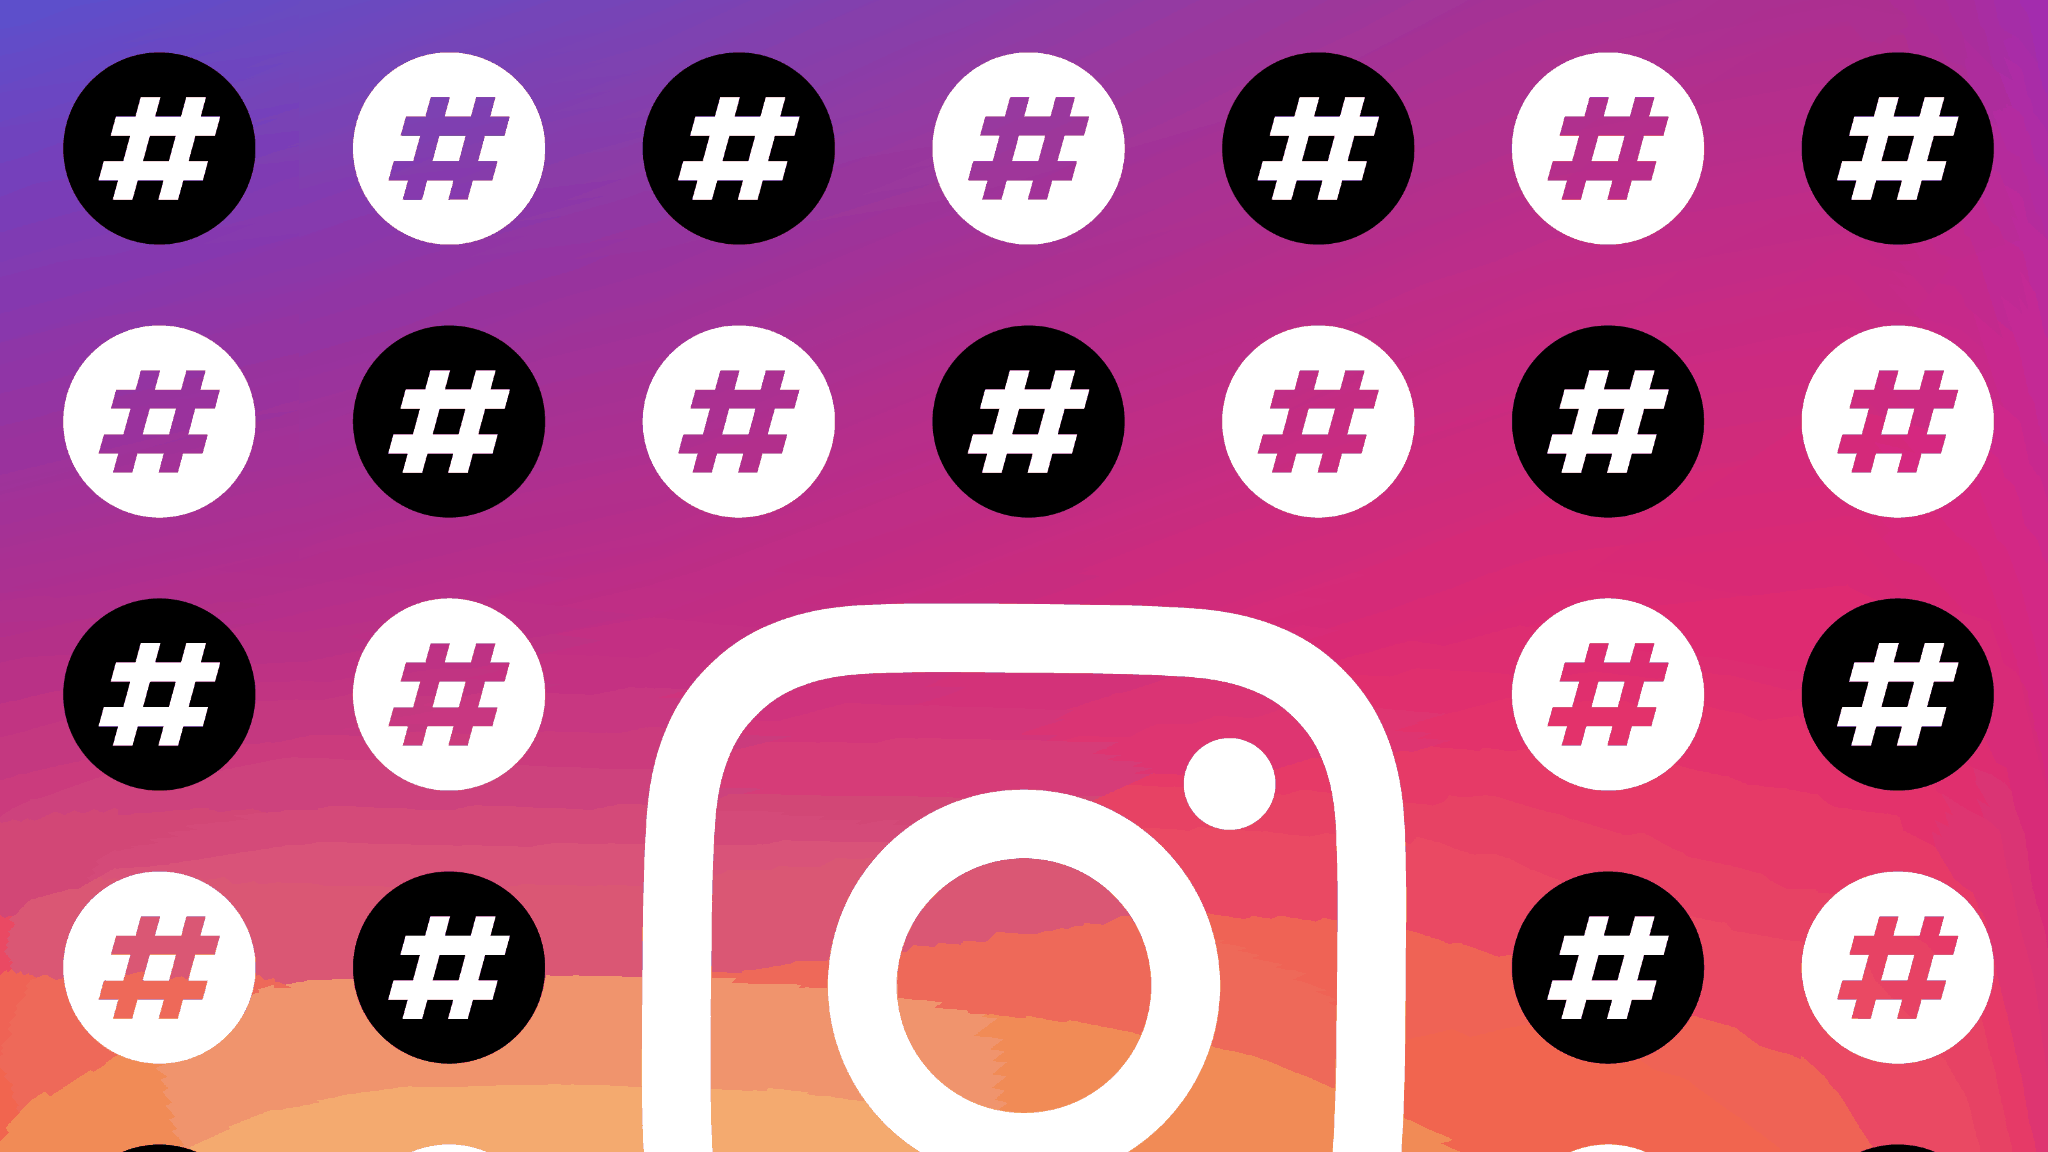 1000 Instagram Followers - 10 Actionable Tips to Get Your First 1000 Instagram Followers - 5